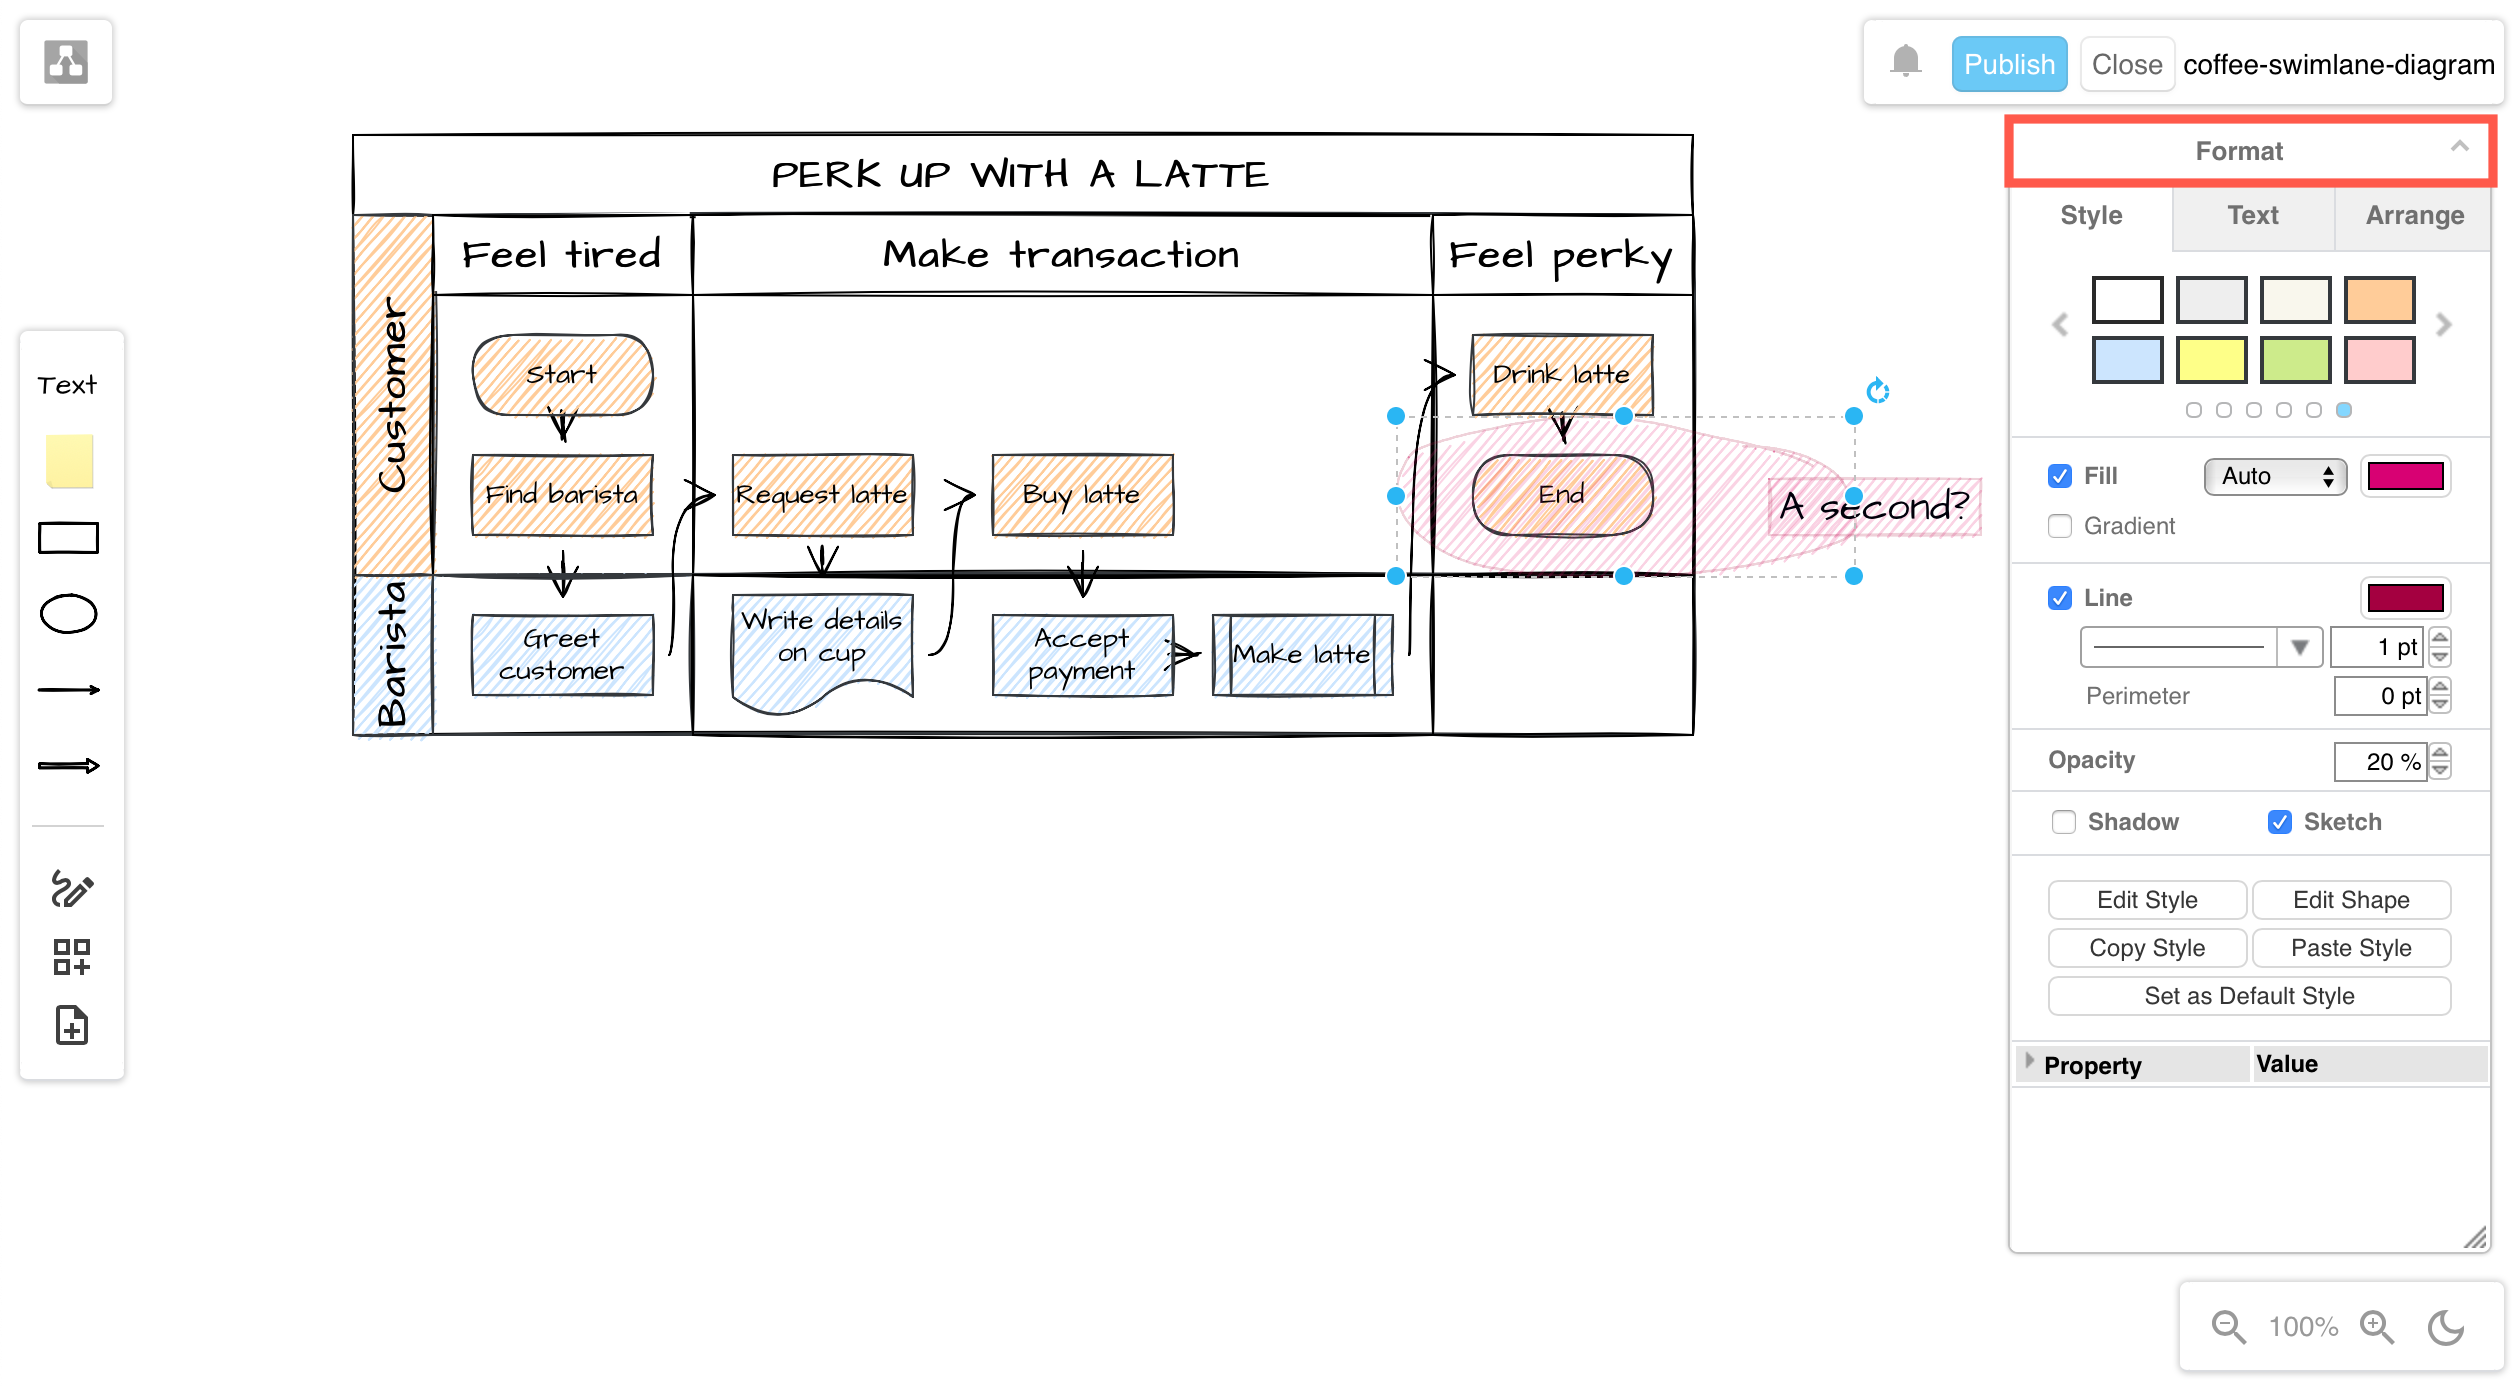 Click on the Format panel's title to open it and style shapes, text and connectors in a draw.io Board diagram